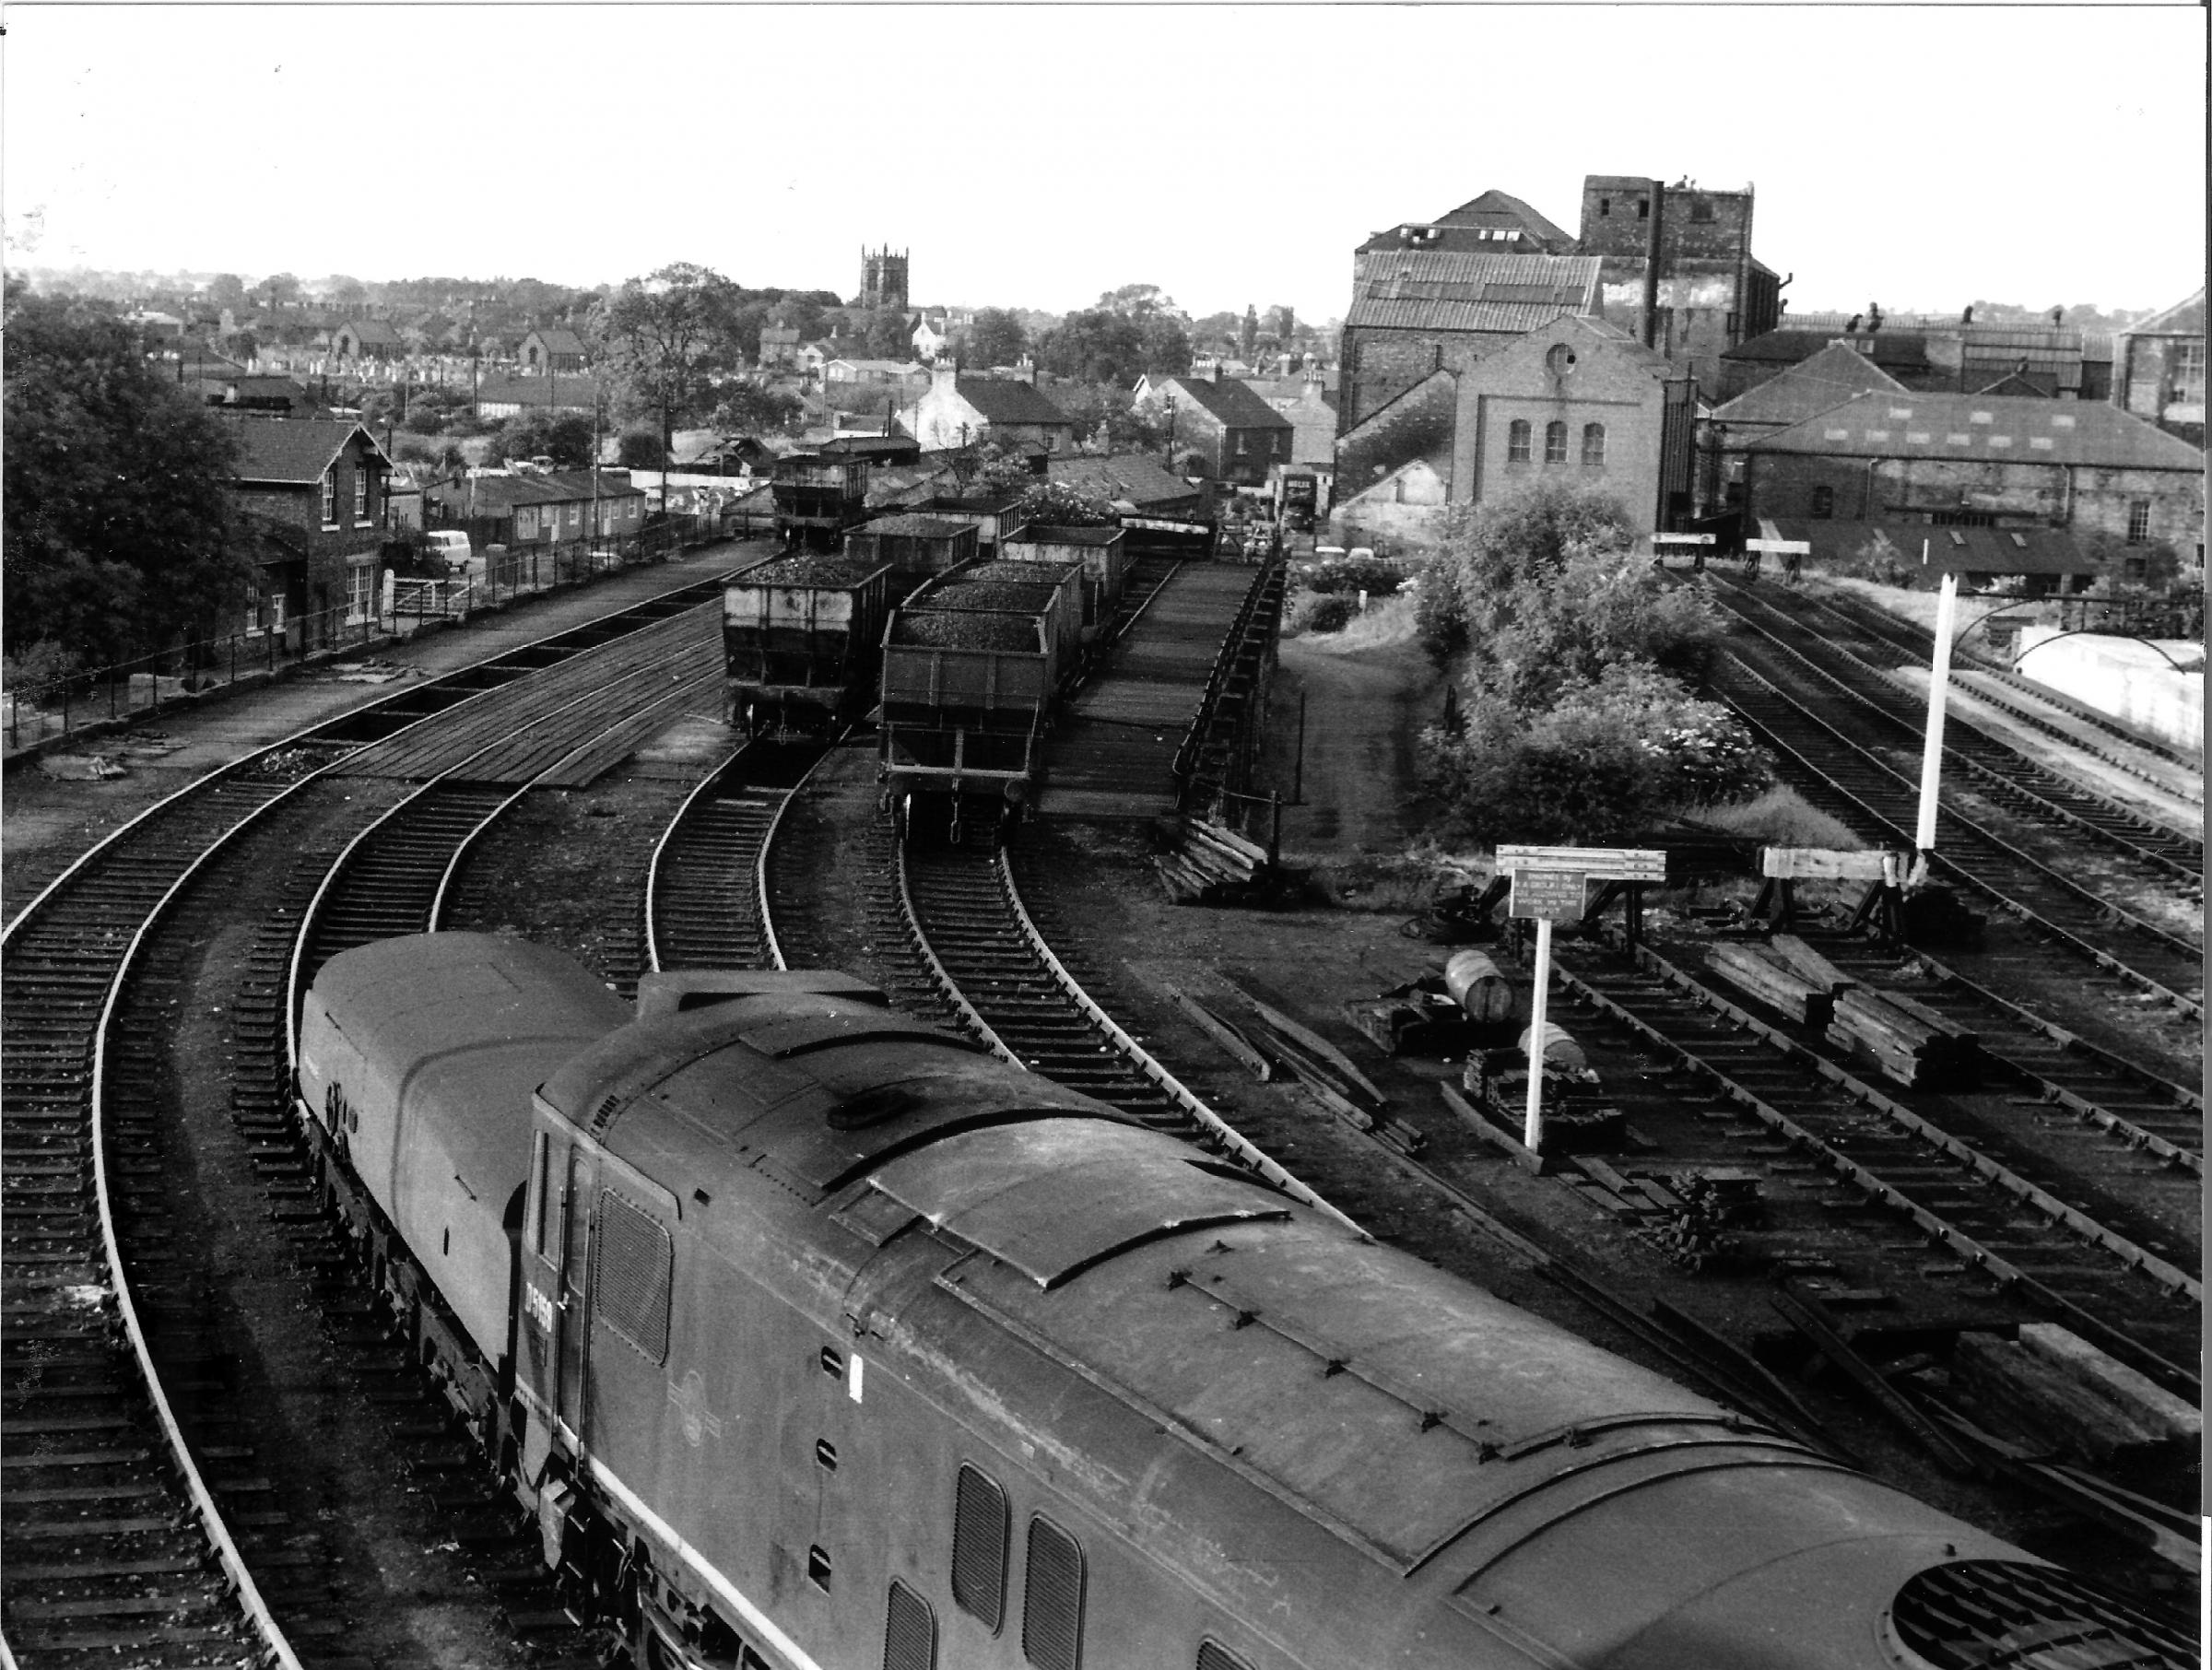 Looking north-east from the Northallerton station box at the coal drops, left, the linoleum factory in the background, and the two tracks for the cattle dock on the right